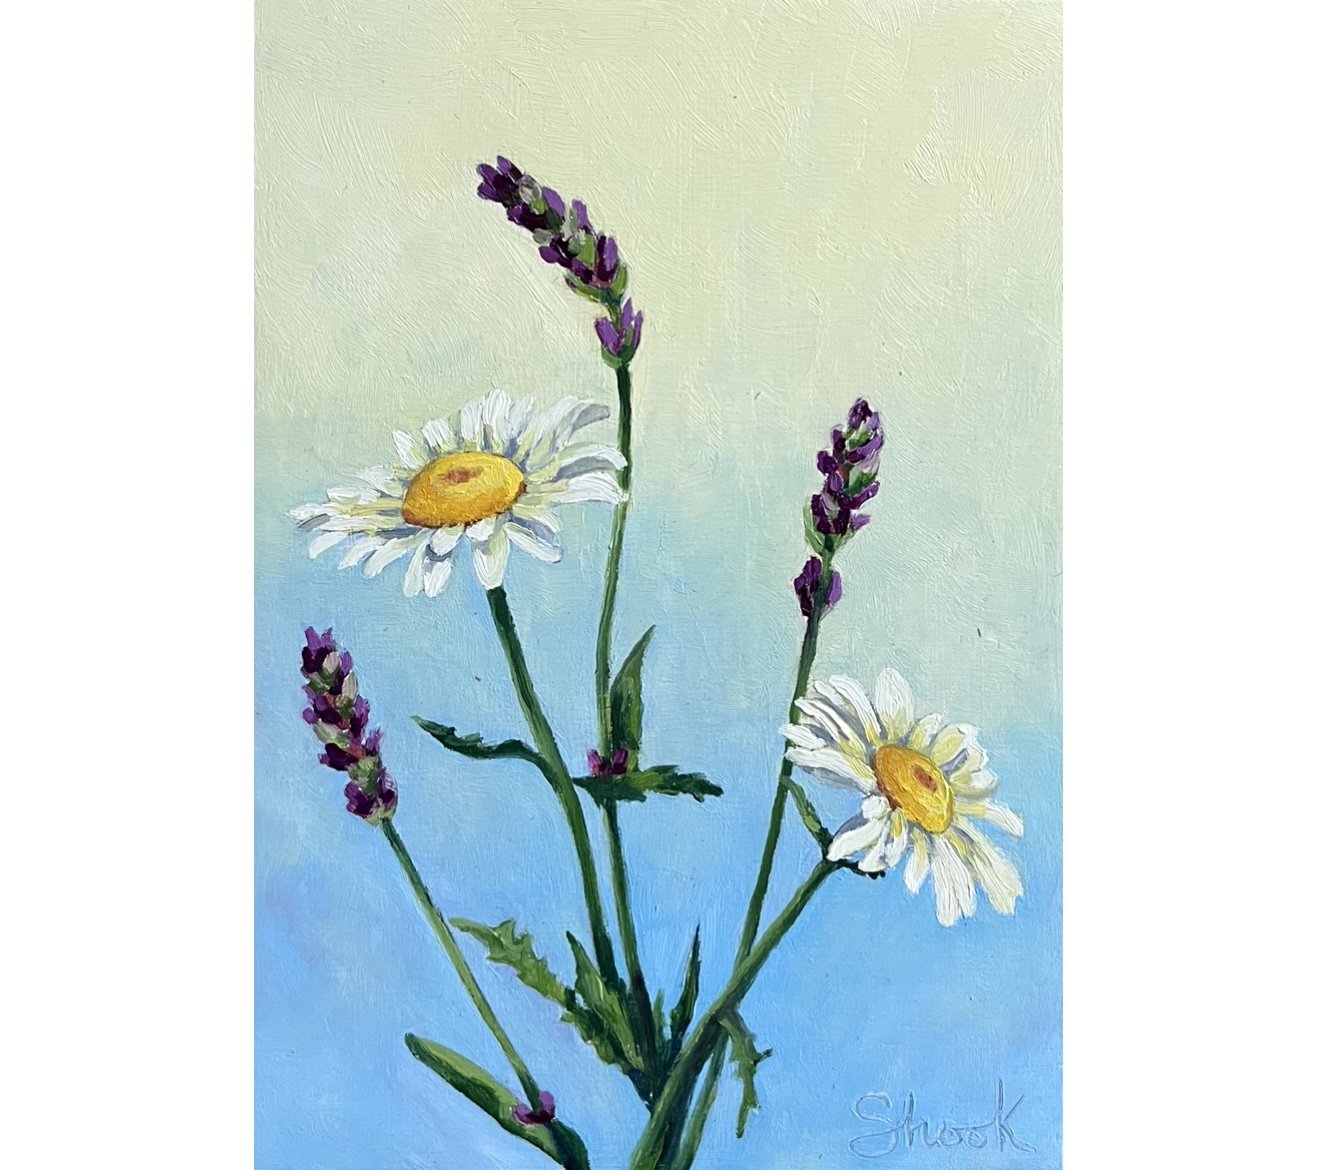 Lavender and Daisies - 5"x7" - SOLD